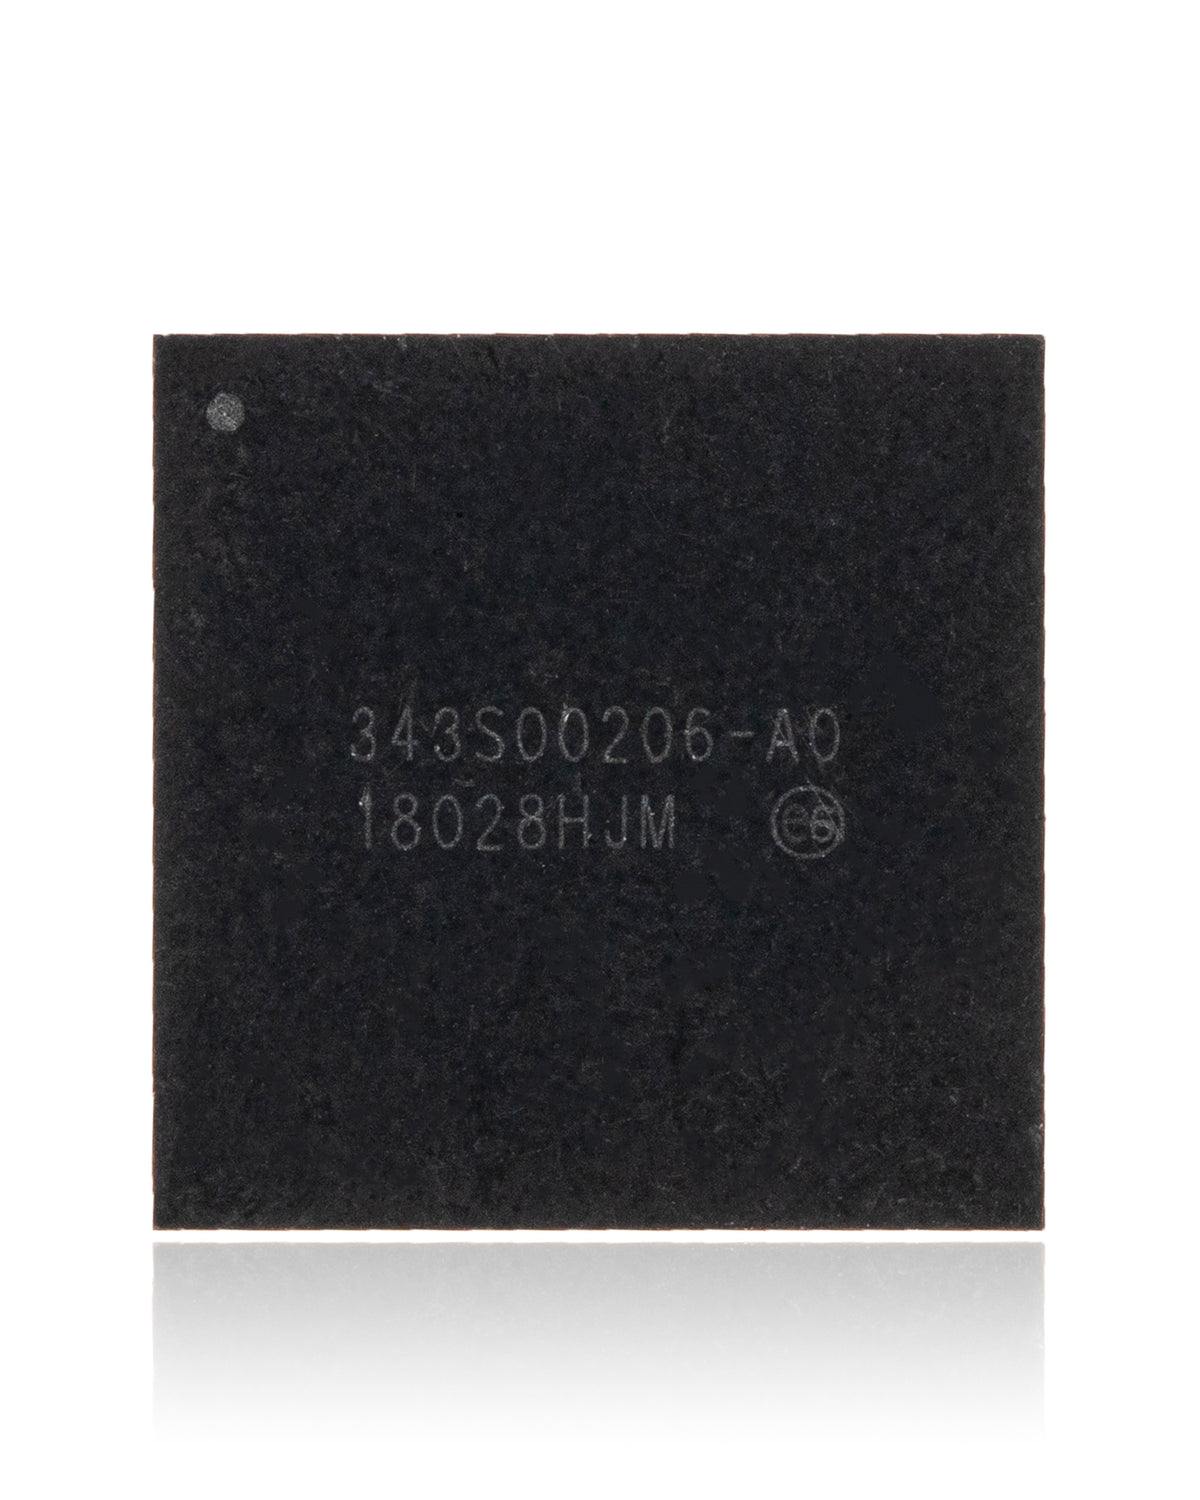 POWER MANAGEMENT IC FOR IPAD 5 (2017) (343S00206)